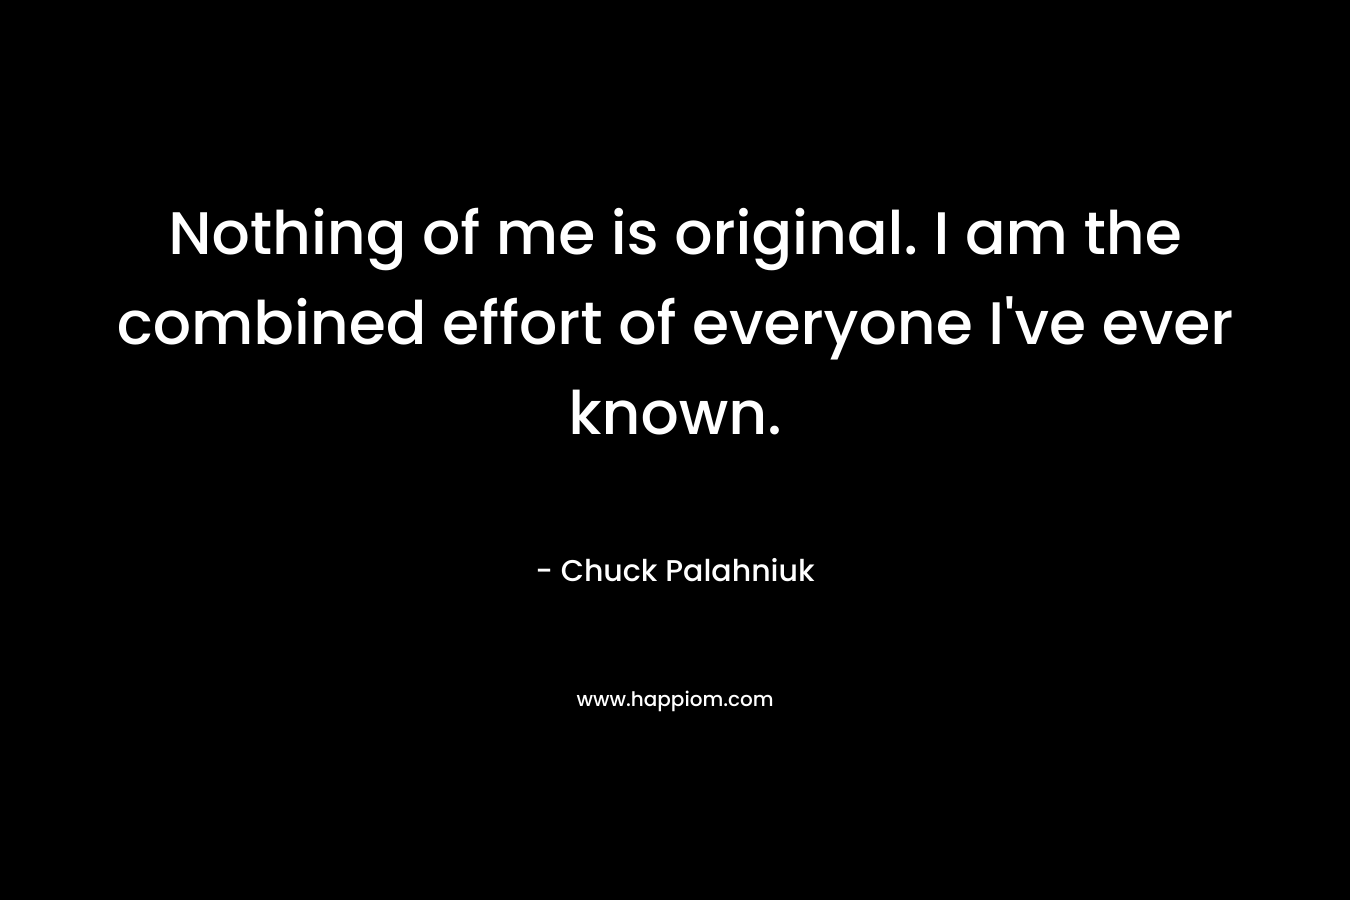 Nothing of me is original. I am the combined effort of everyone I've ever known.